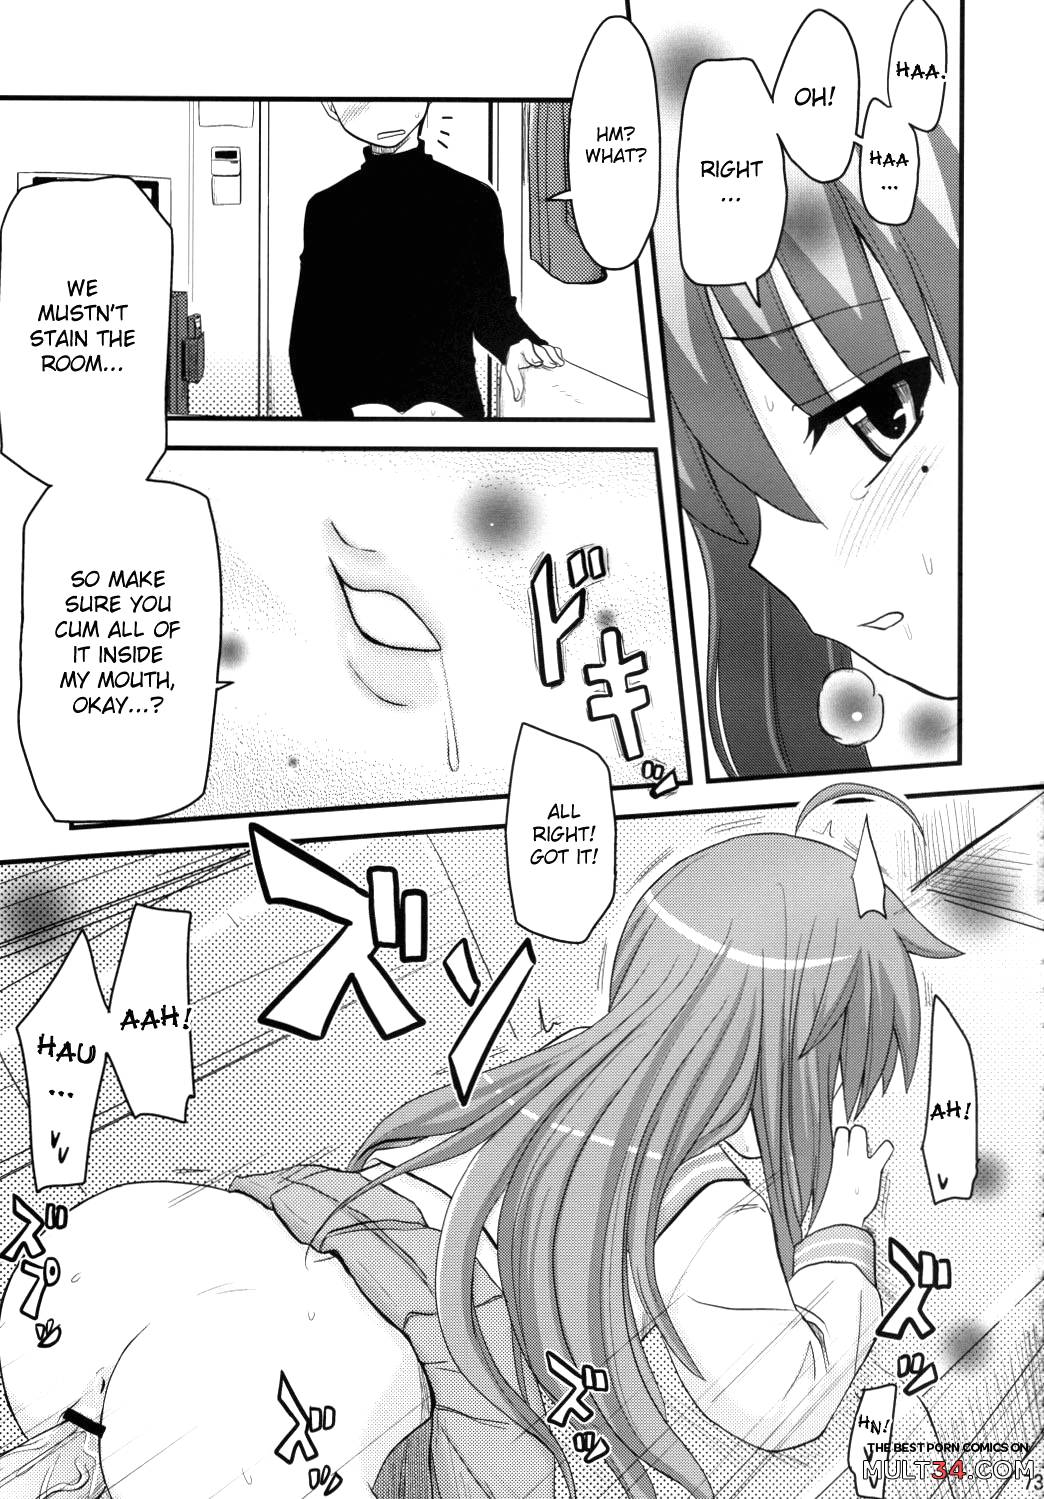 Konata and Oh-zu 4 people each and every one + 1 page 69